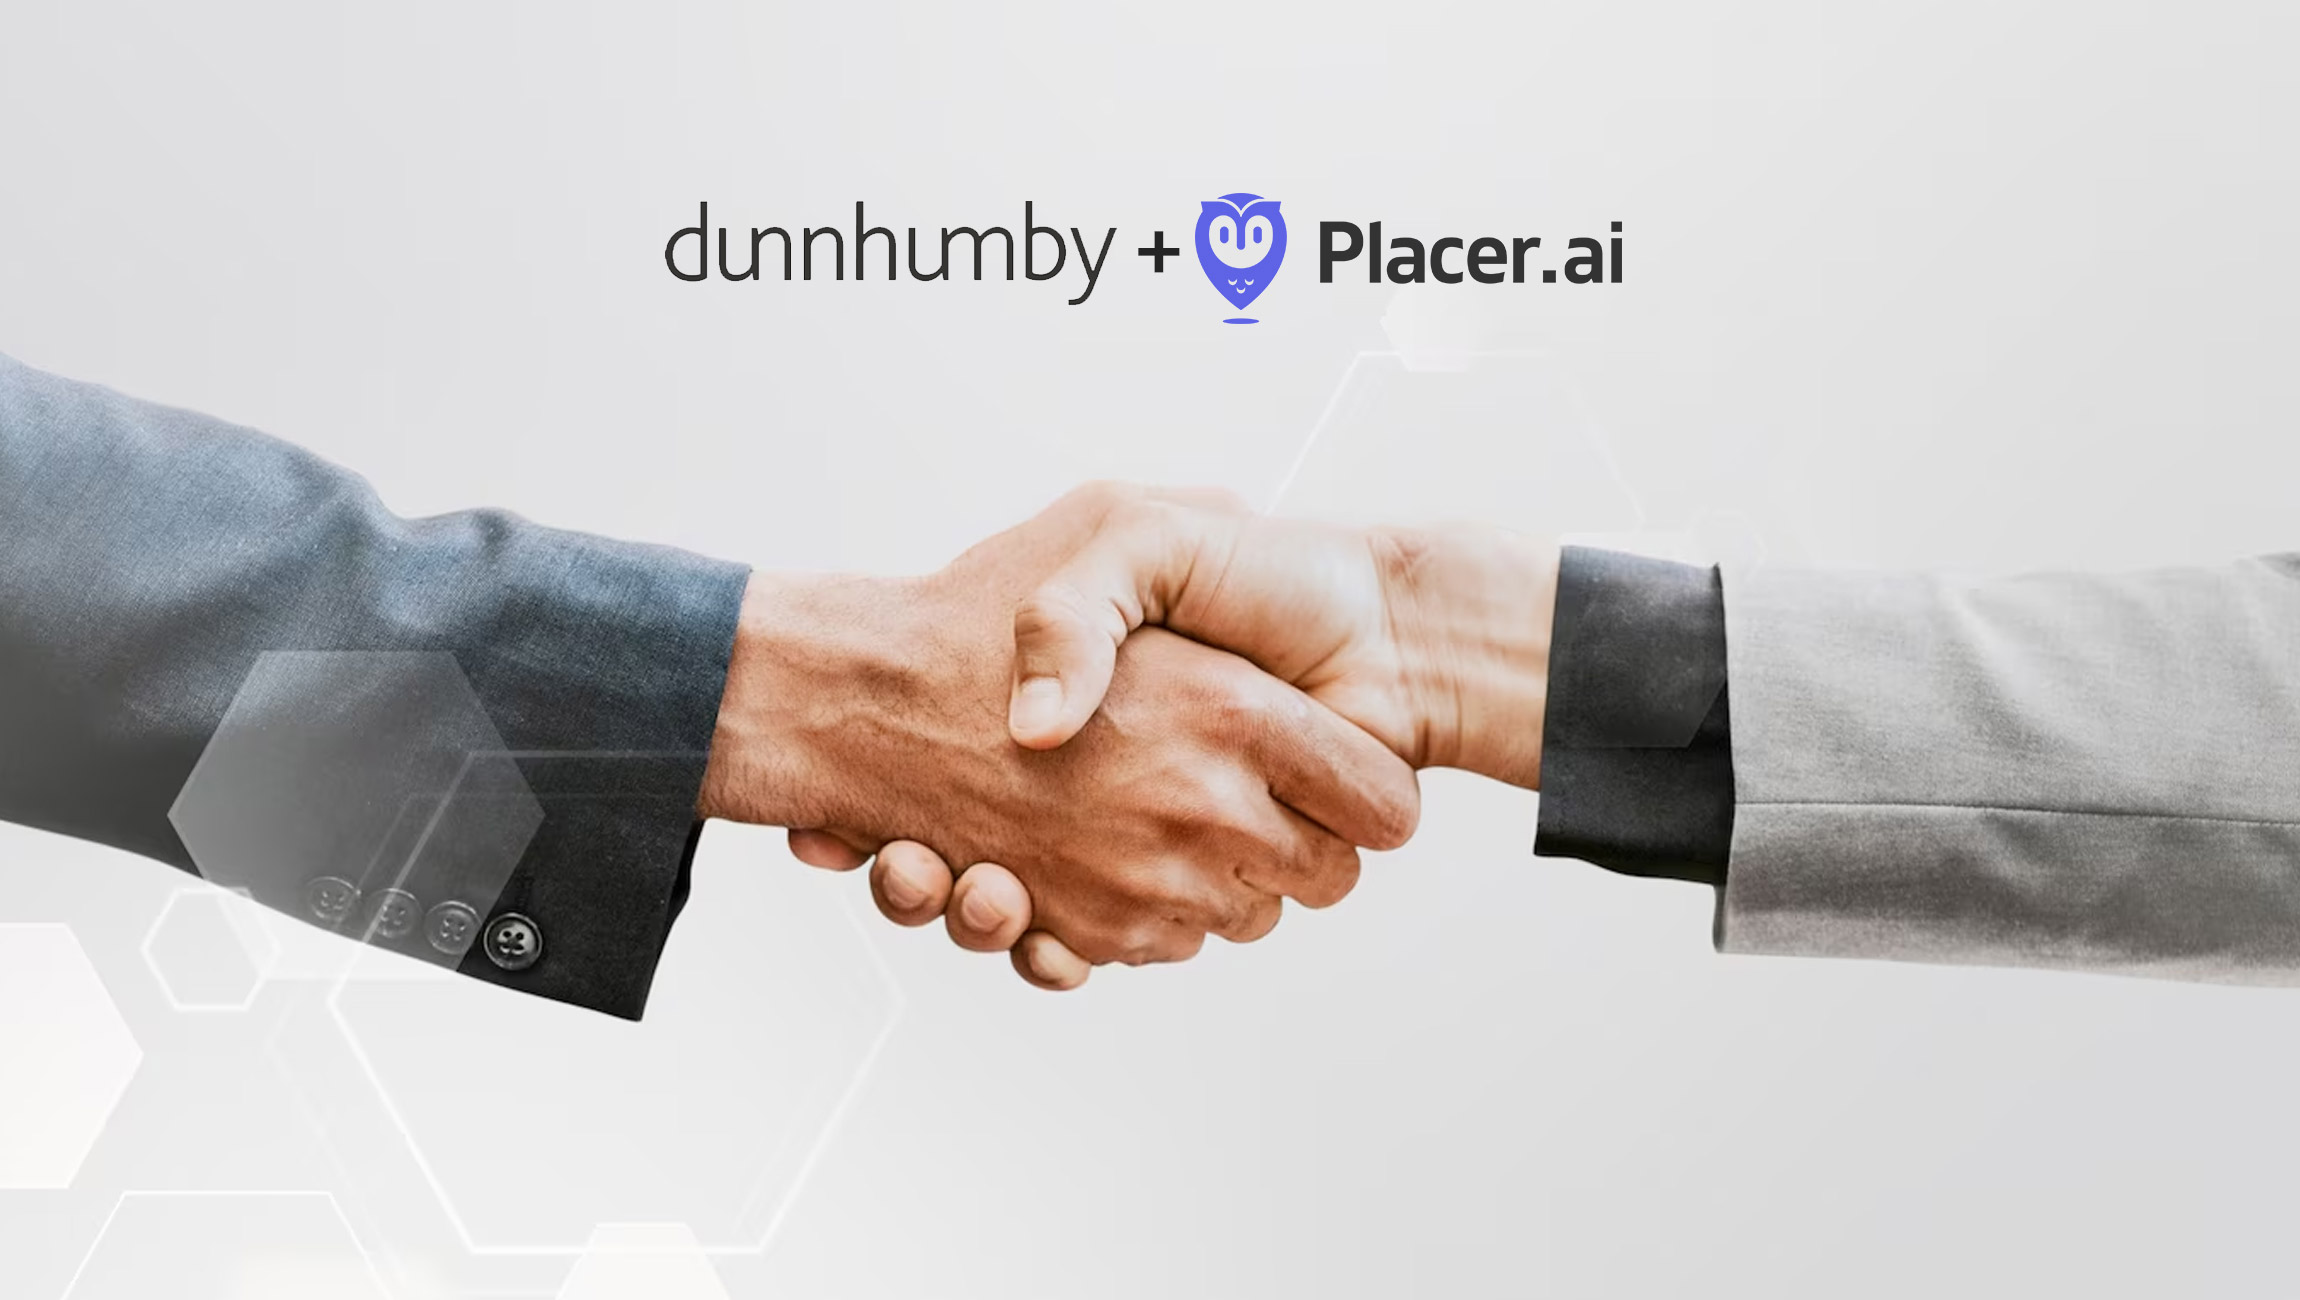 dunnhumby-and-Placer.ai-Strike-Partnership-Enabling-Retailers-to-Unlock-Unique-Door-to-Purchase-Customer-Journey-Insights